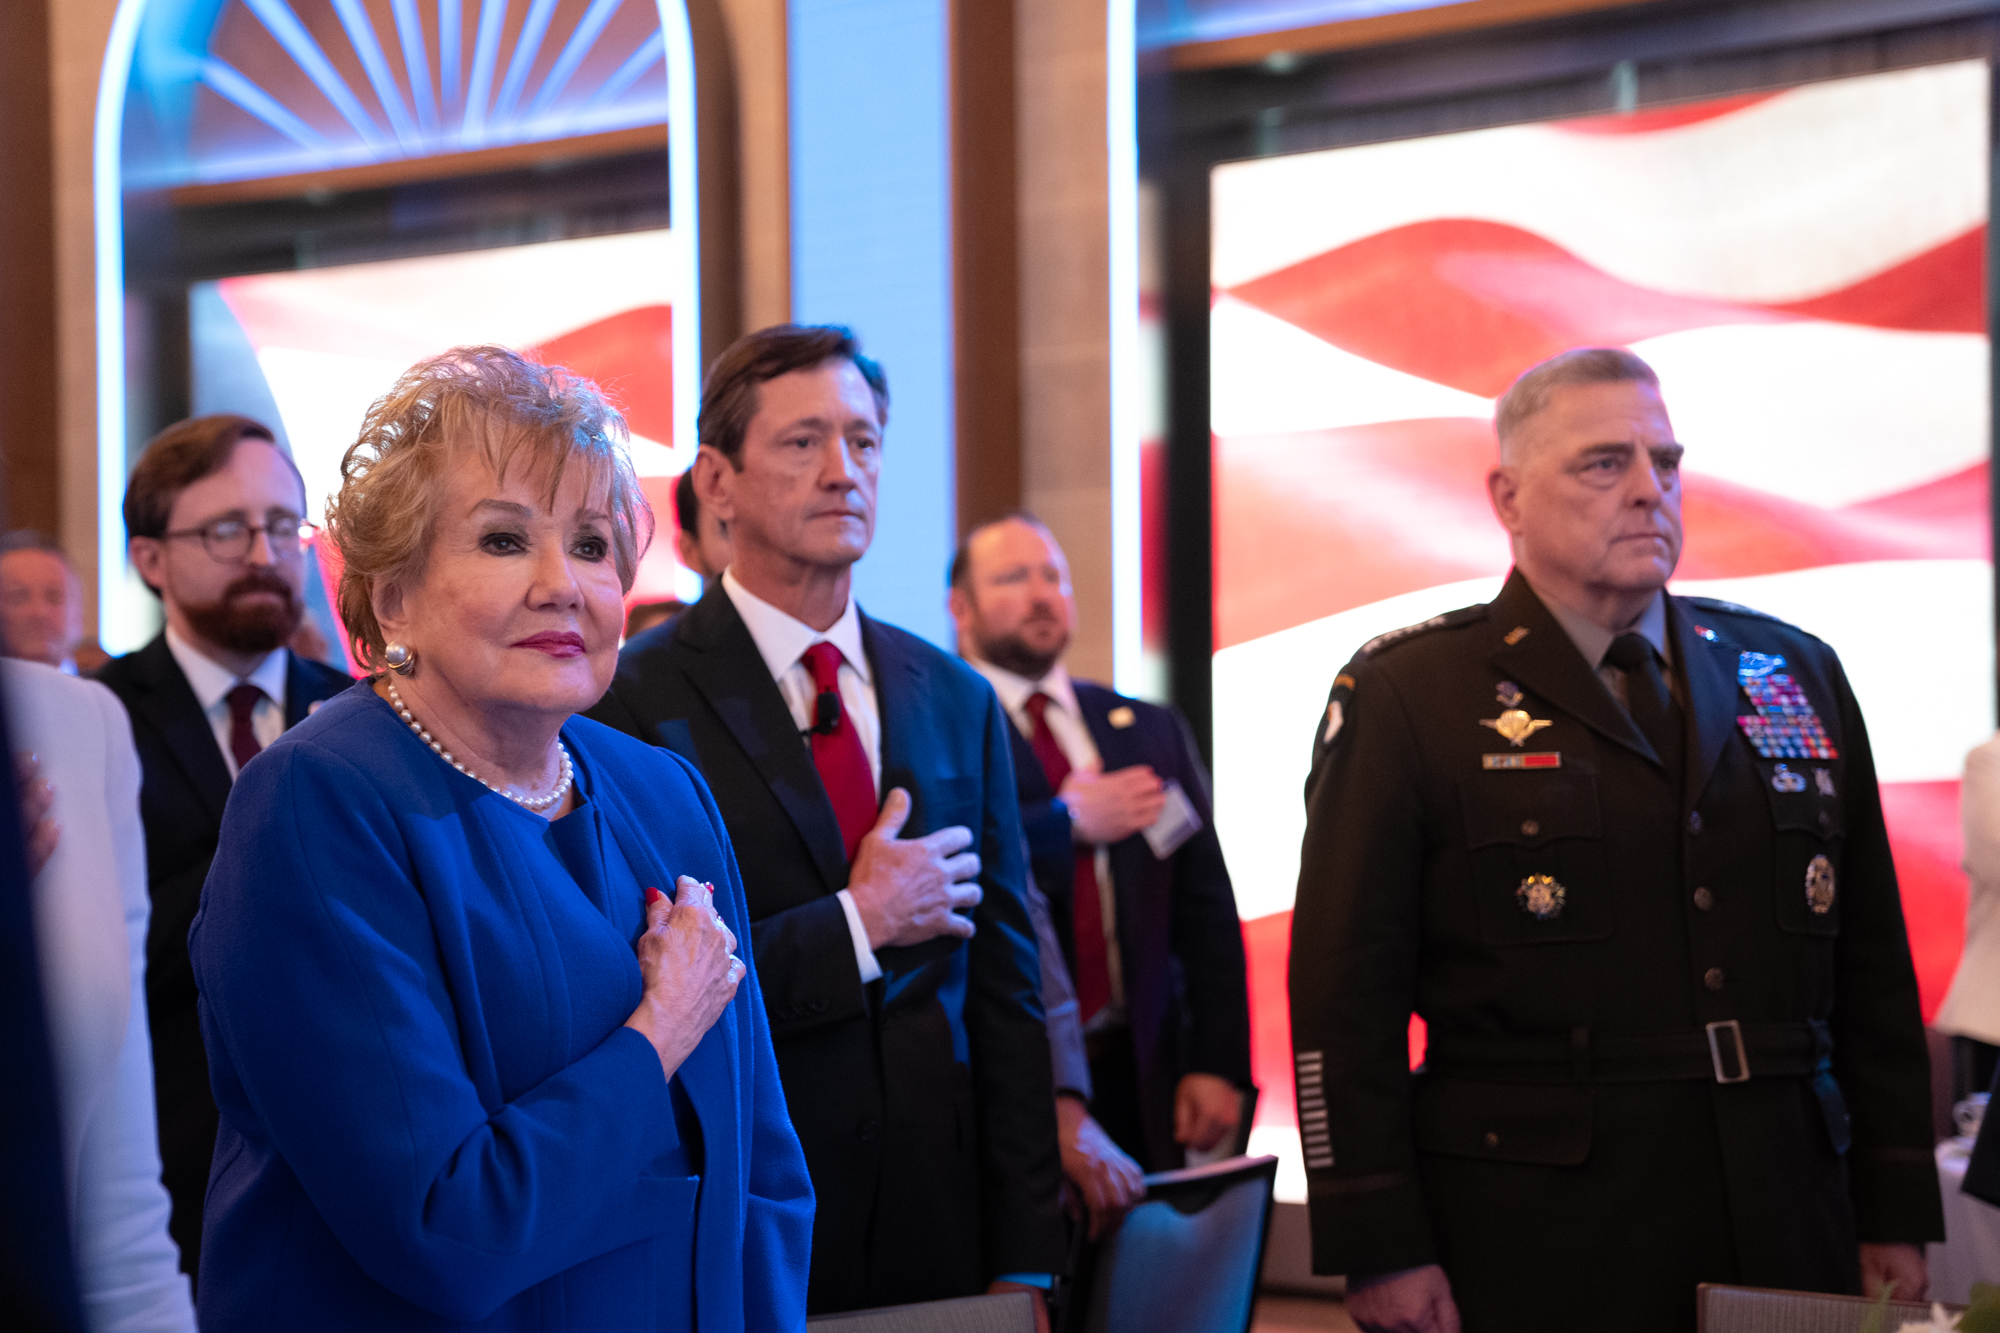 Sen. Elizabeth Dole of the Elizabeth Dole Foundation, USAA President and CEO Wayne Peacock, and General Mark Milley, chairman of the Joint Chiefs of Staff